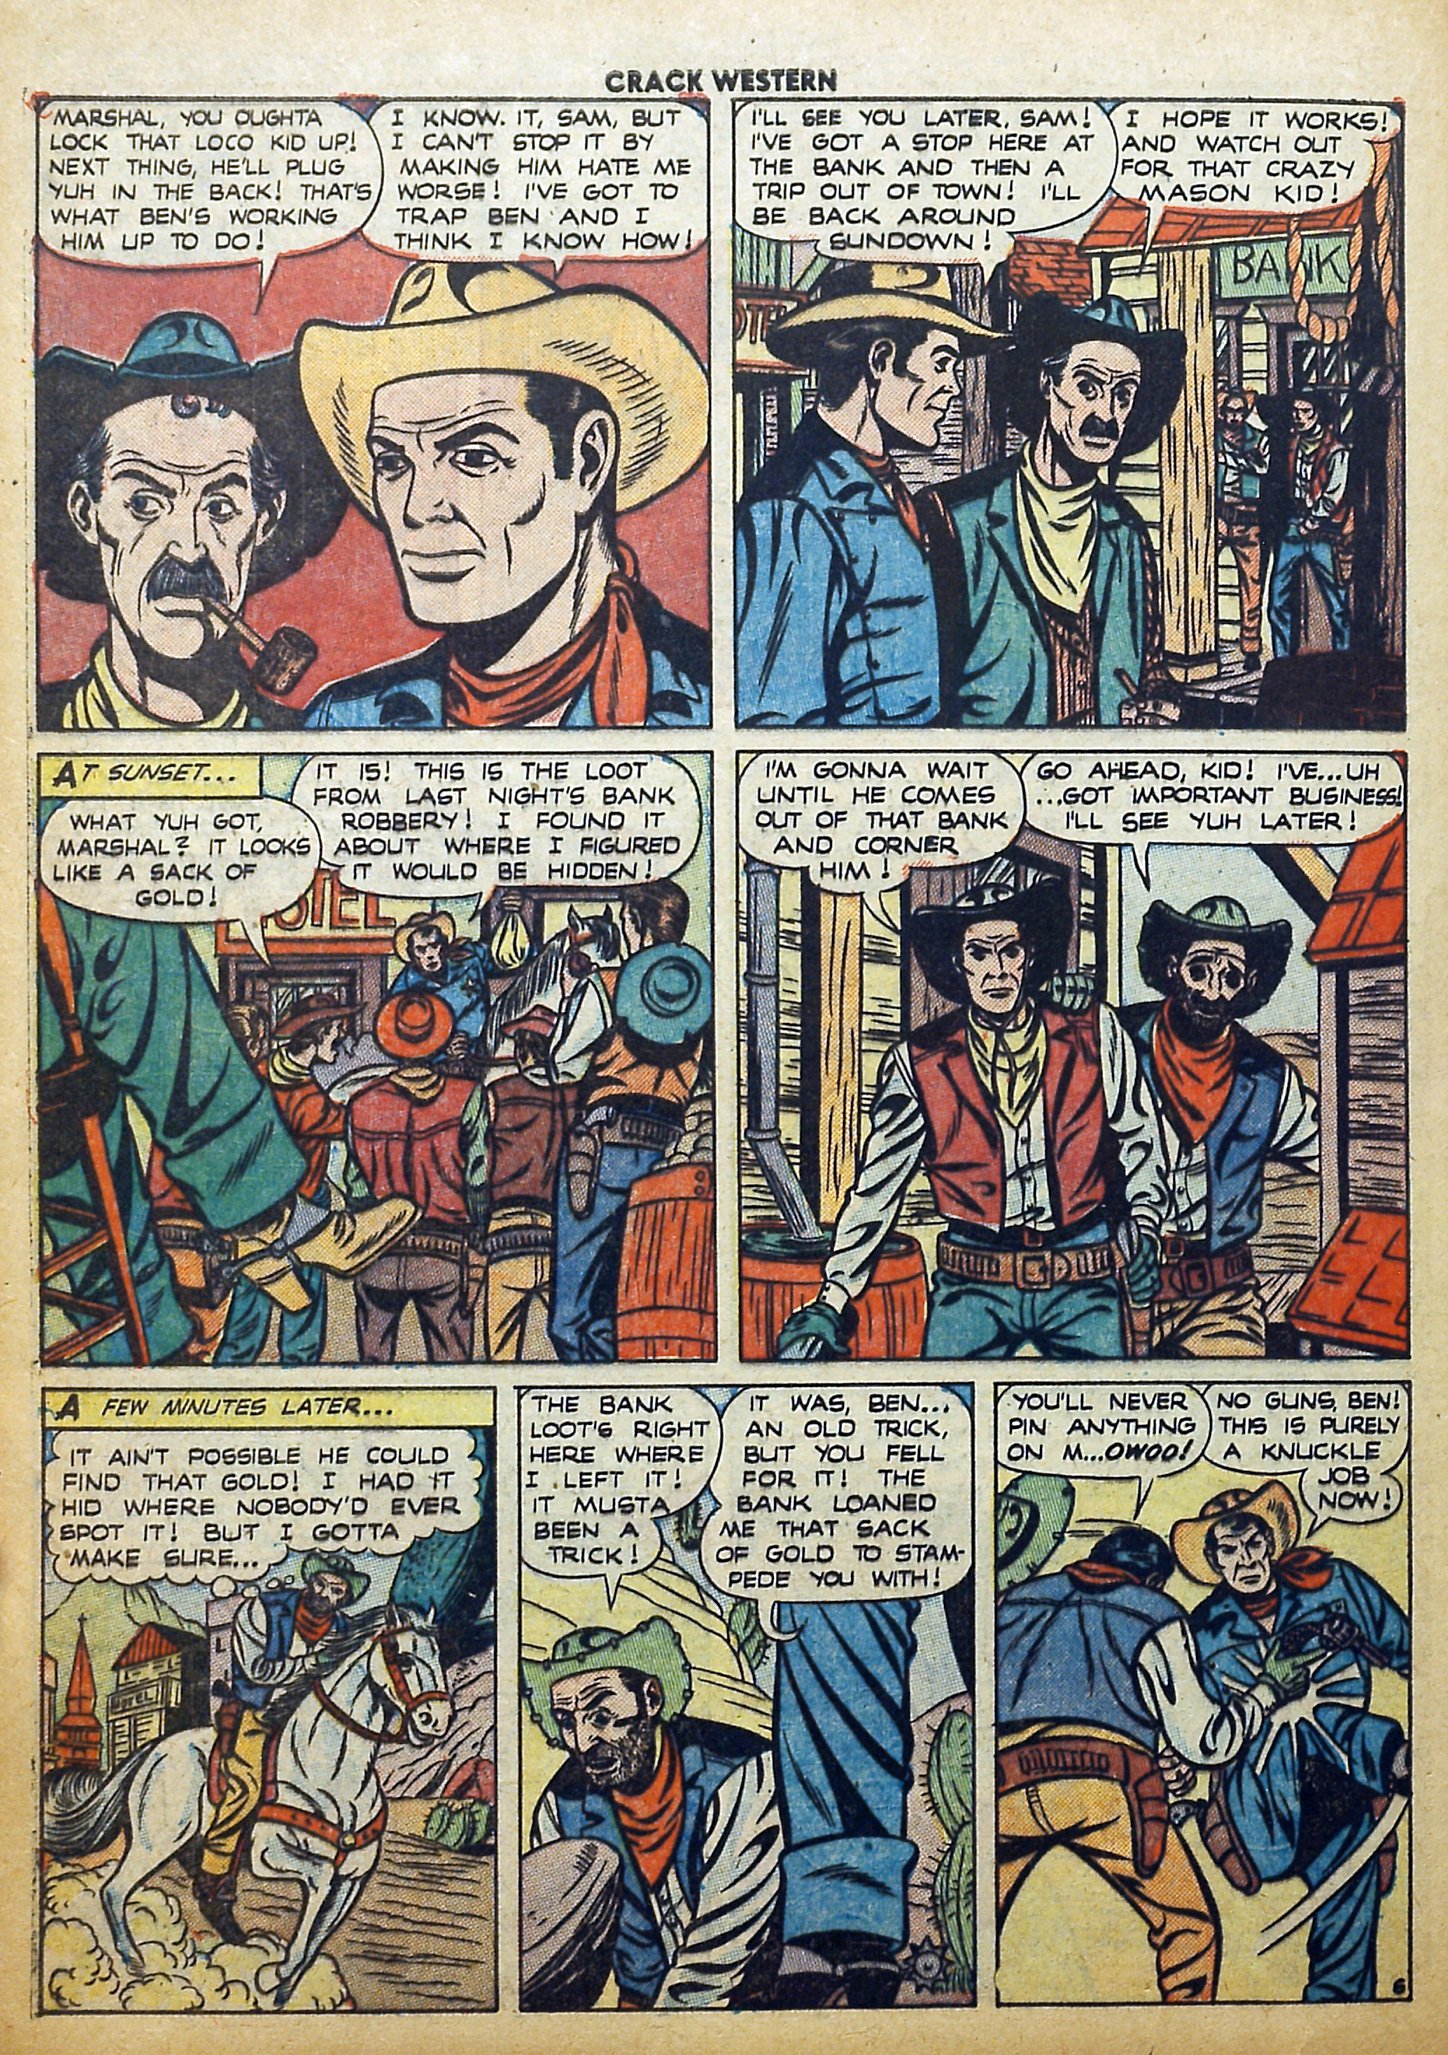 Read online Crack Western comic -  Issue #75 - 32